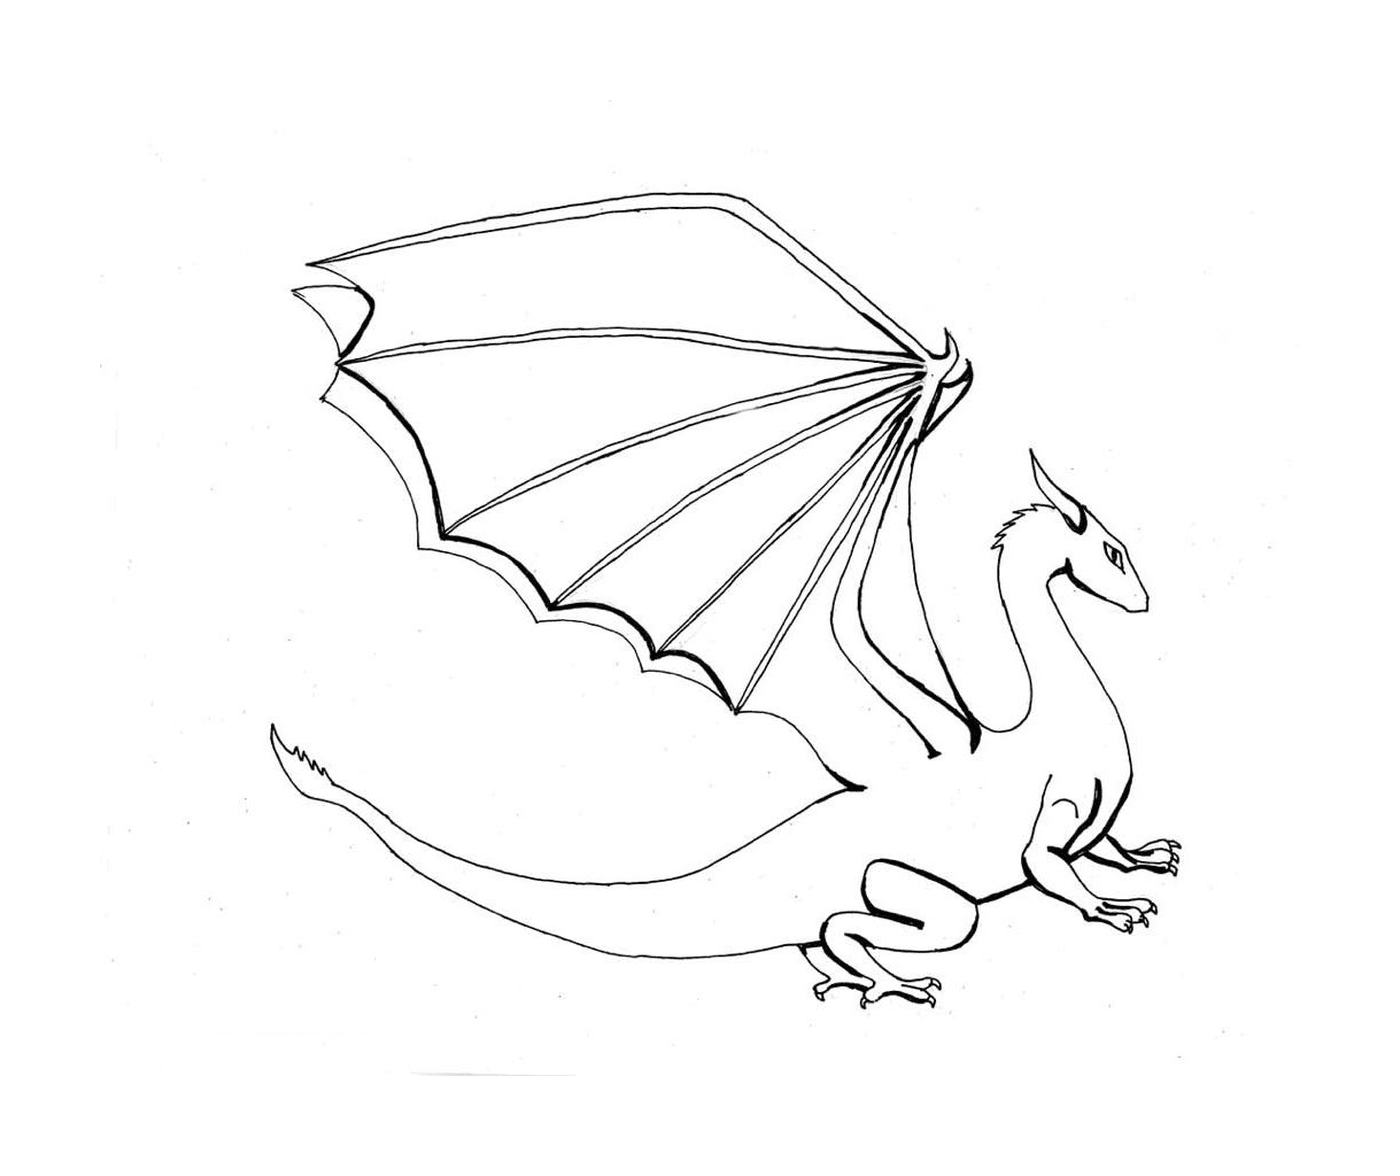  A white dragon with a long tail 